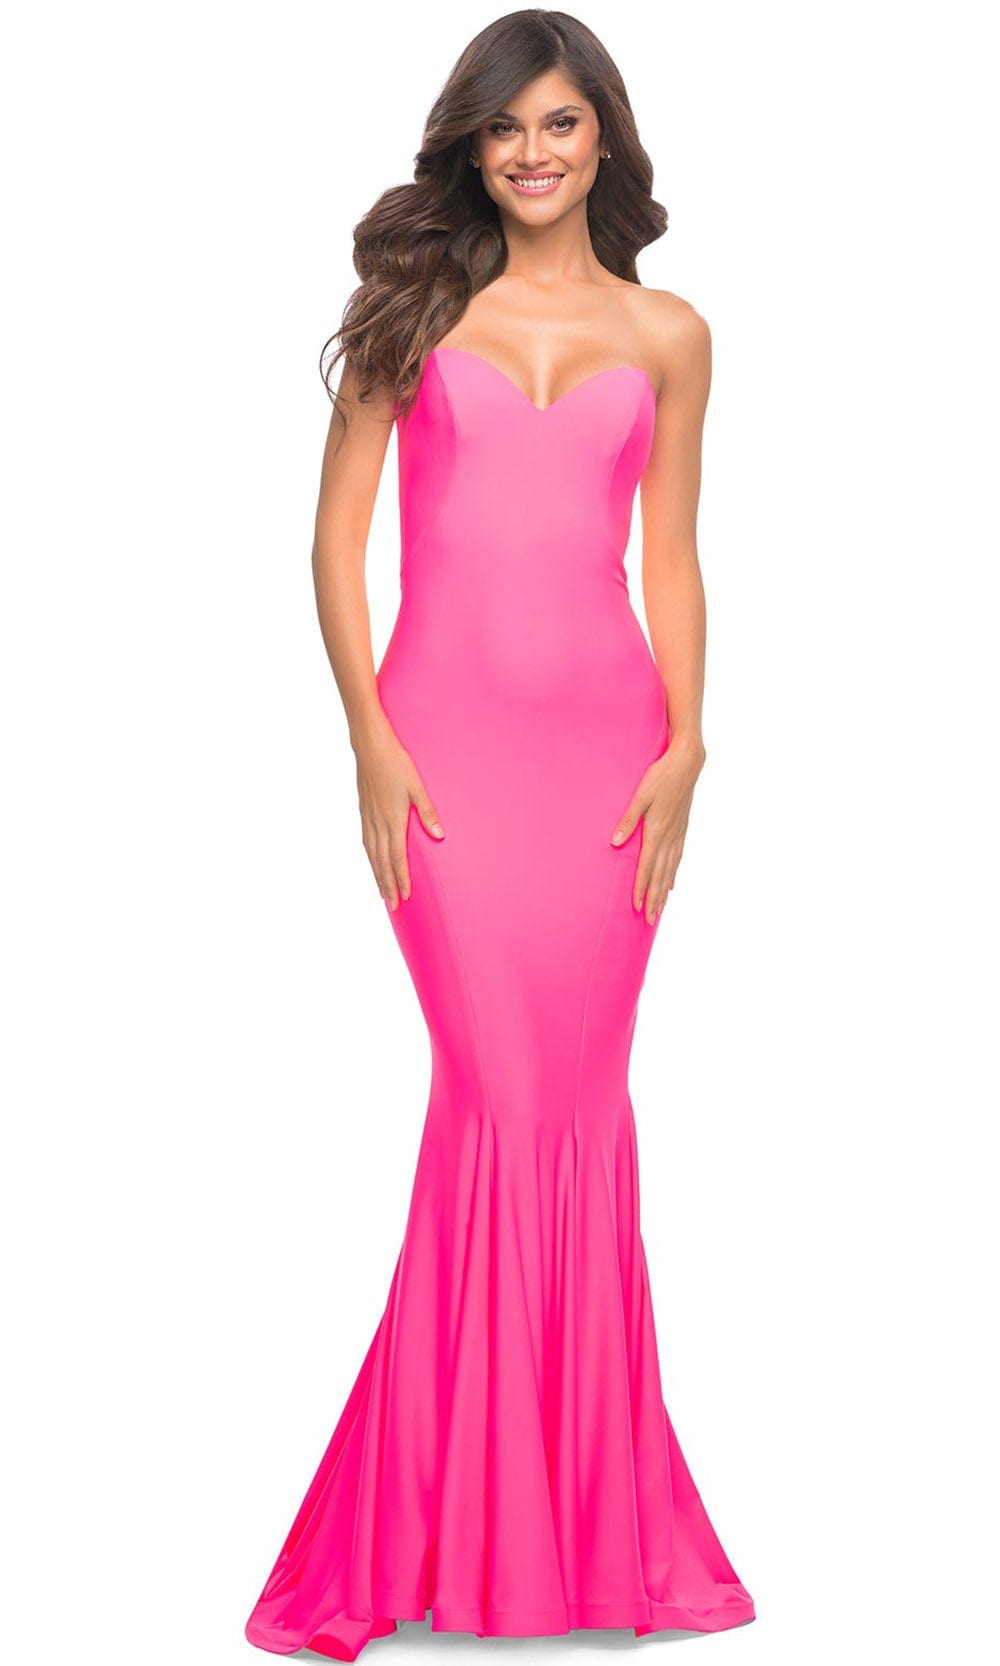 Image of La Femme 30648 - Strapless Sweetheart Mermaid Gown